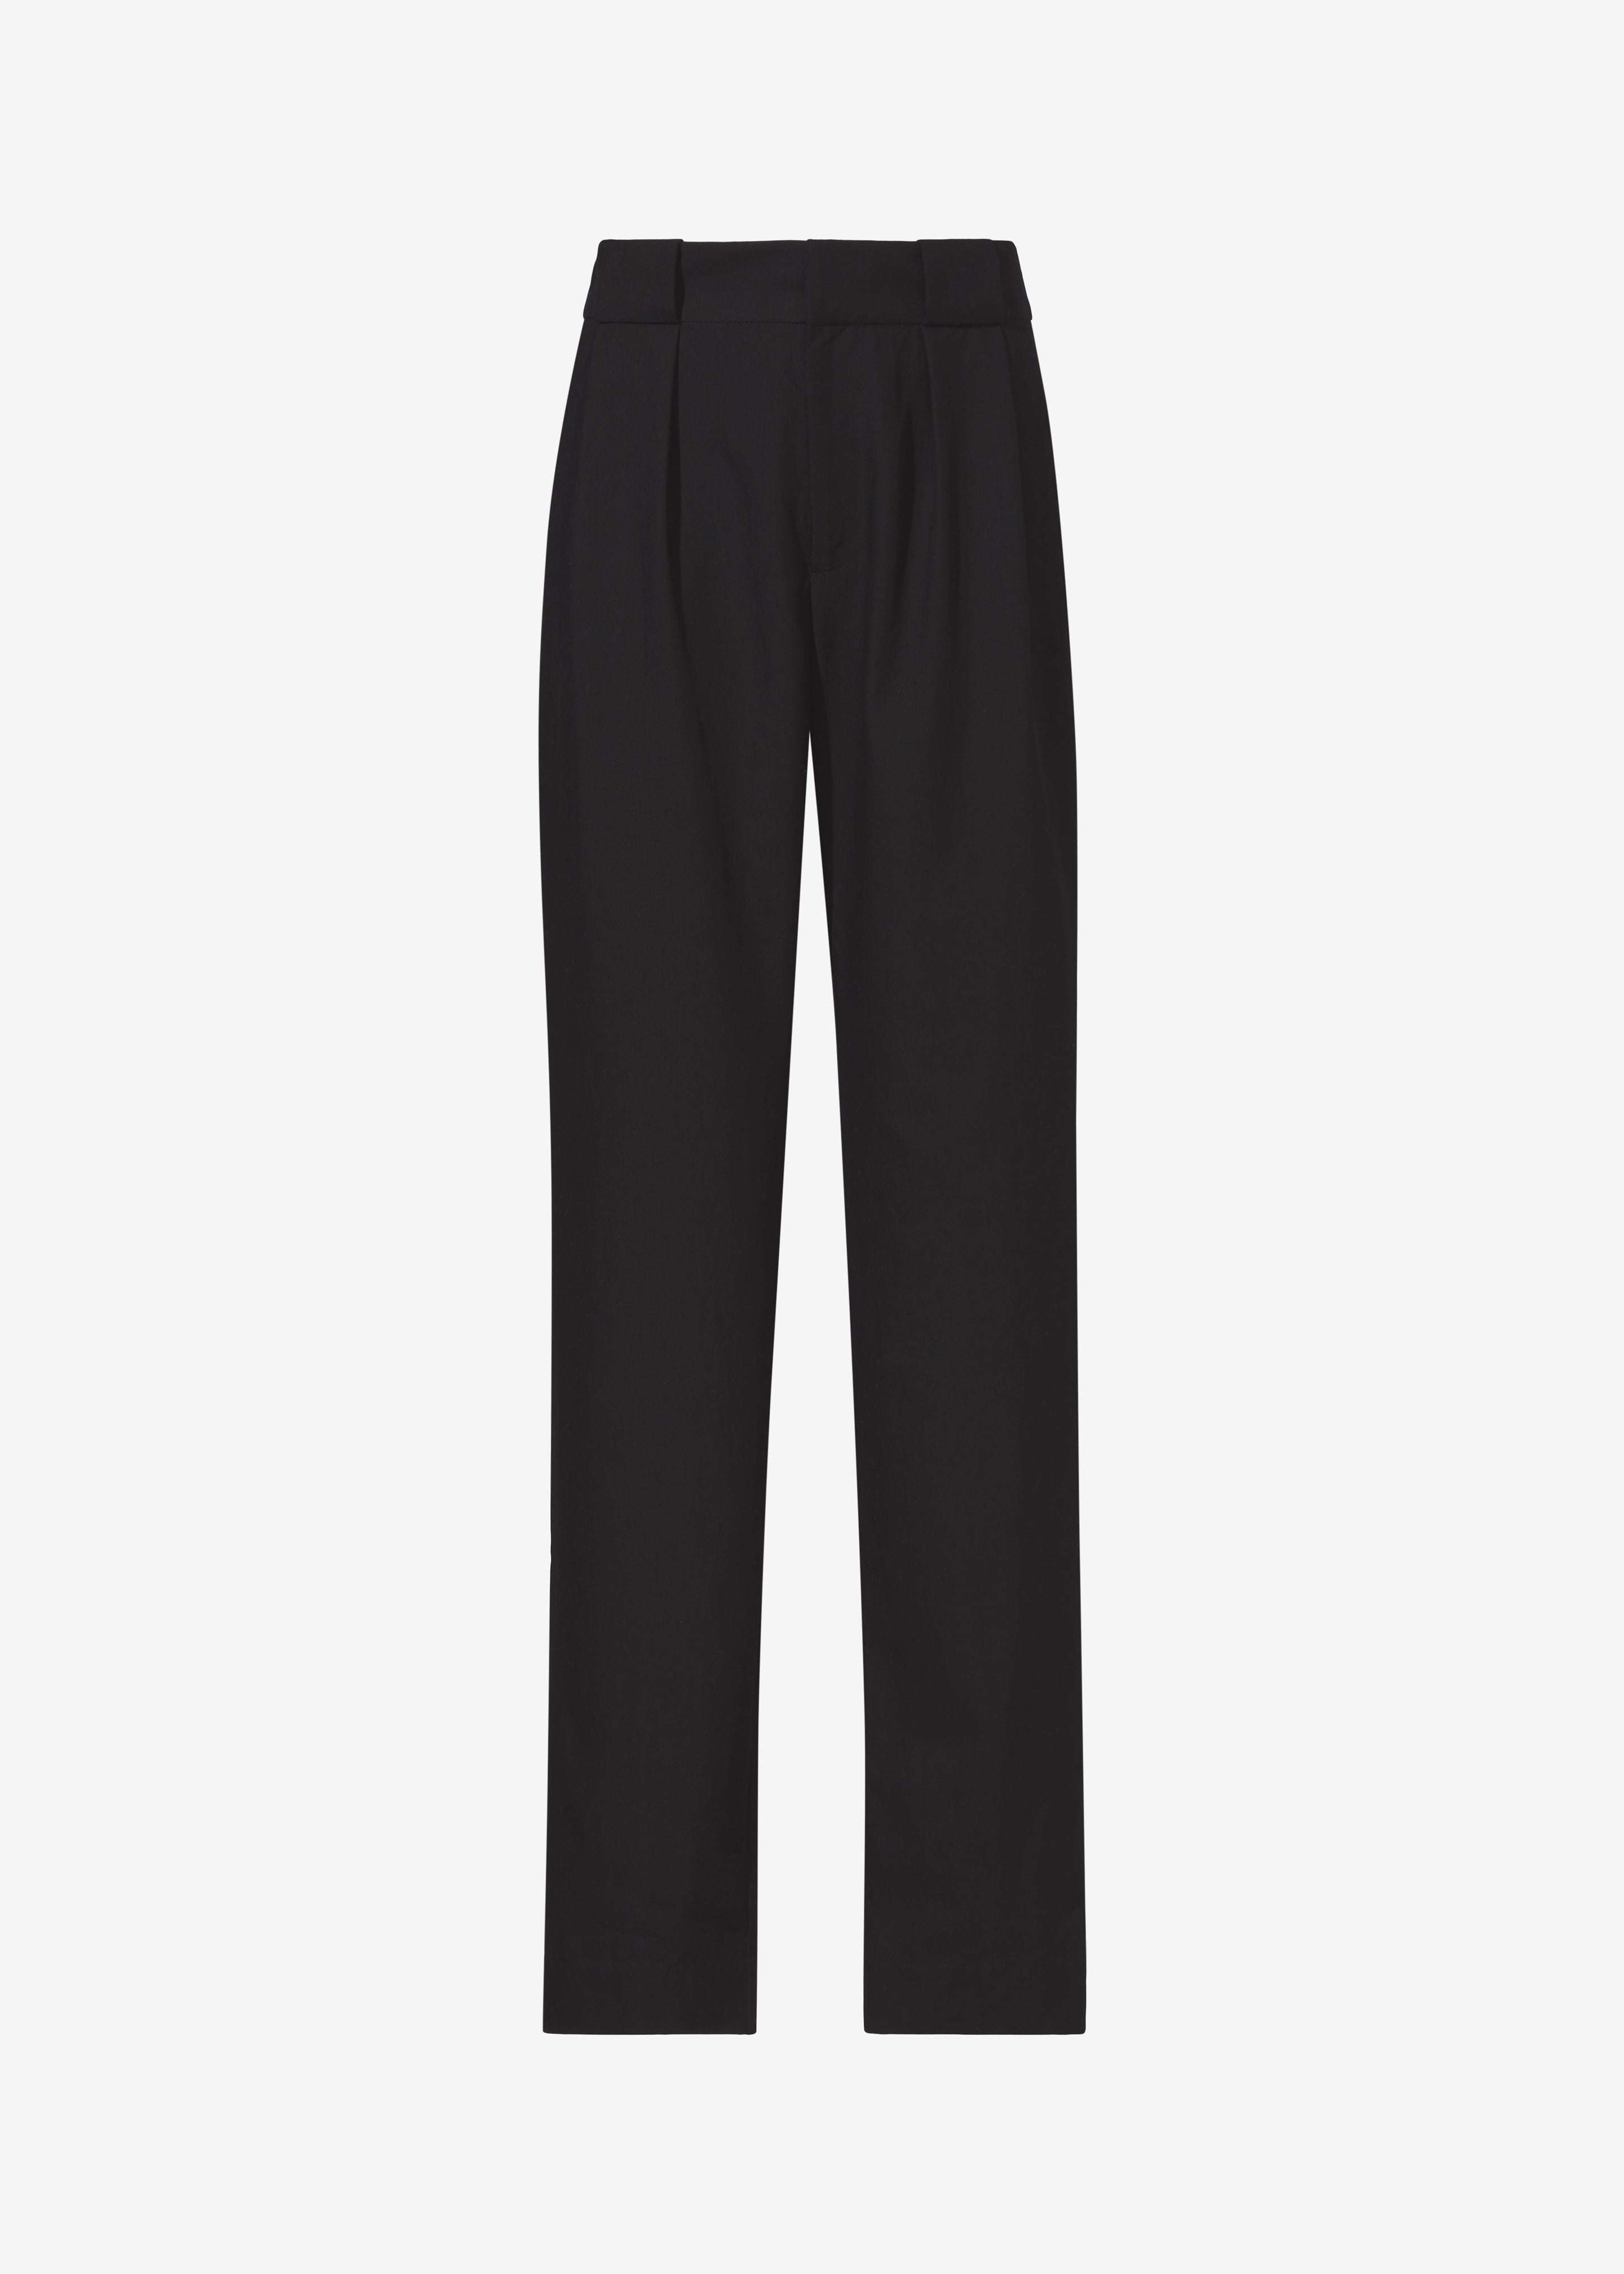 Proenza Schouler White Label Drapey Suiting Trousers - Black - 6